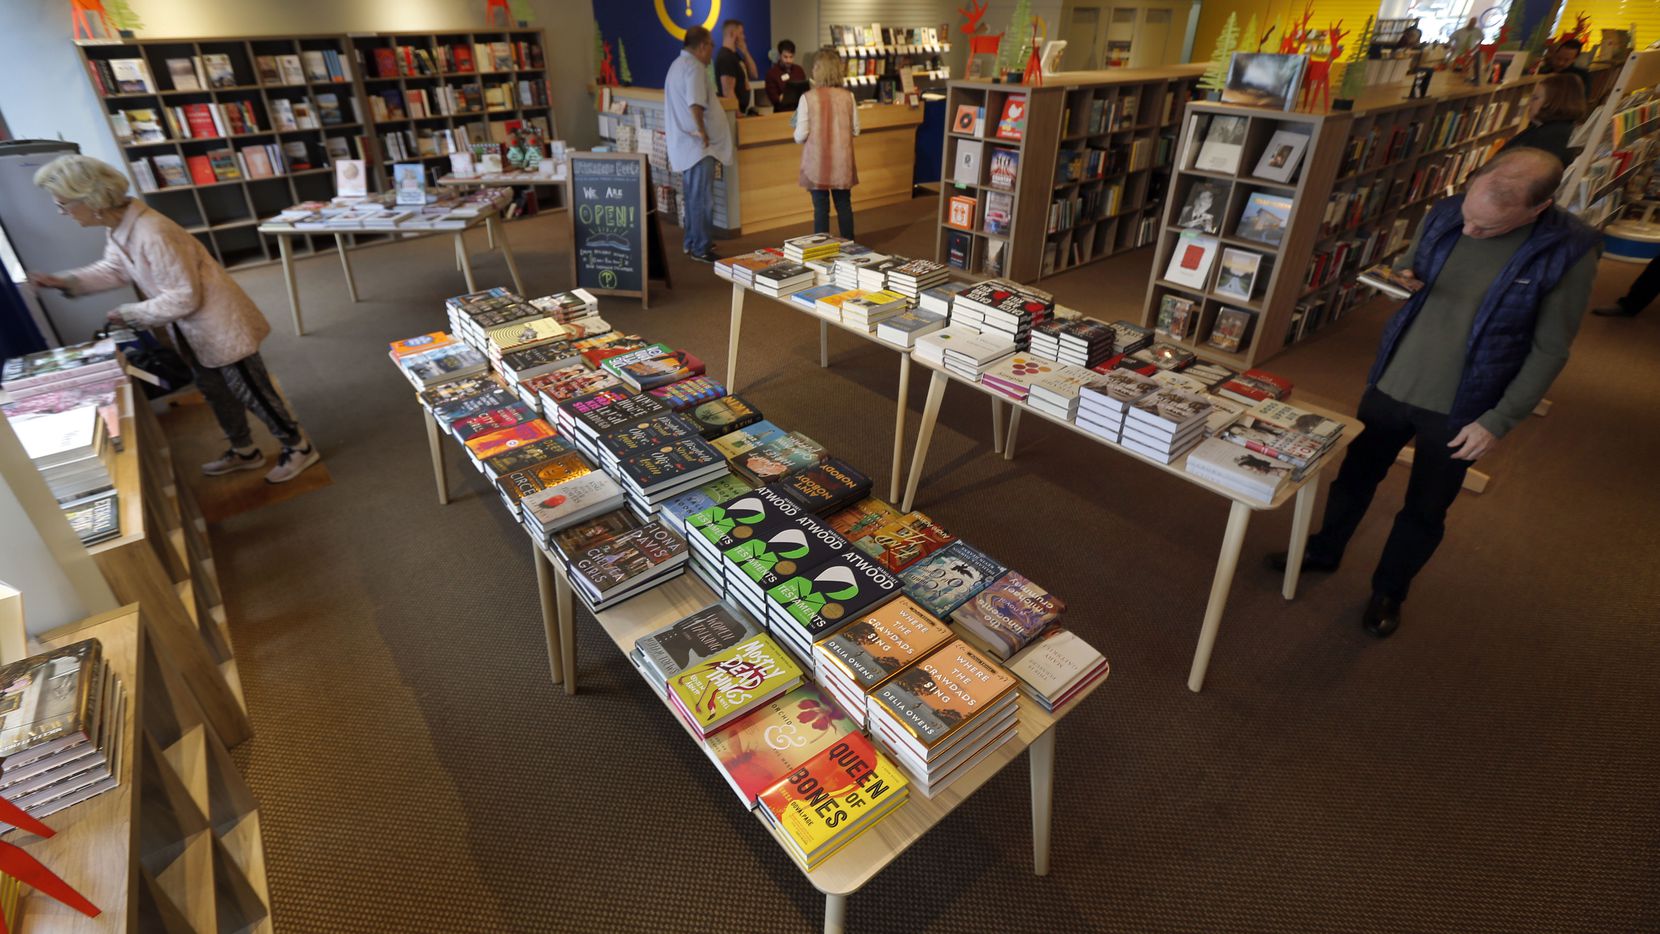 Interabang Books at 5600 W Lovers Ln. on November 26, 2019. After closing during the...